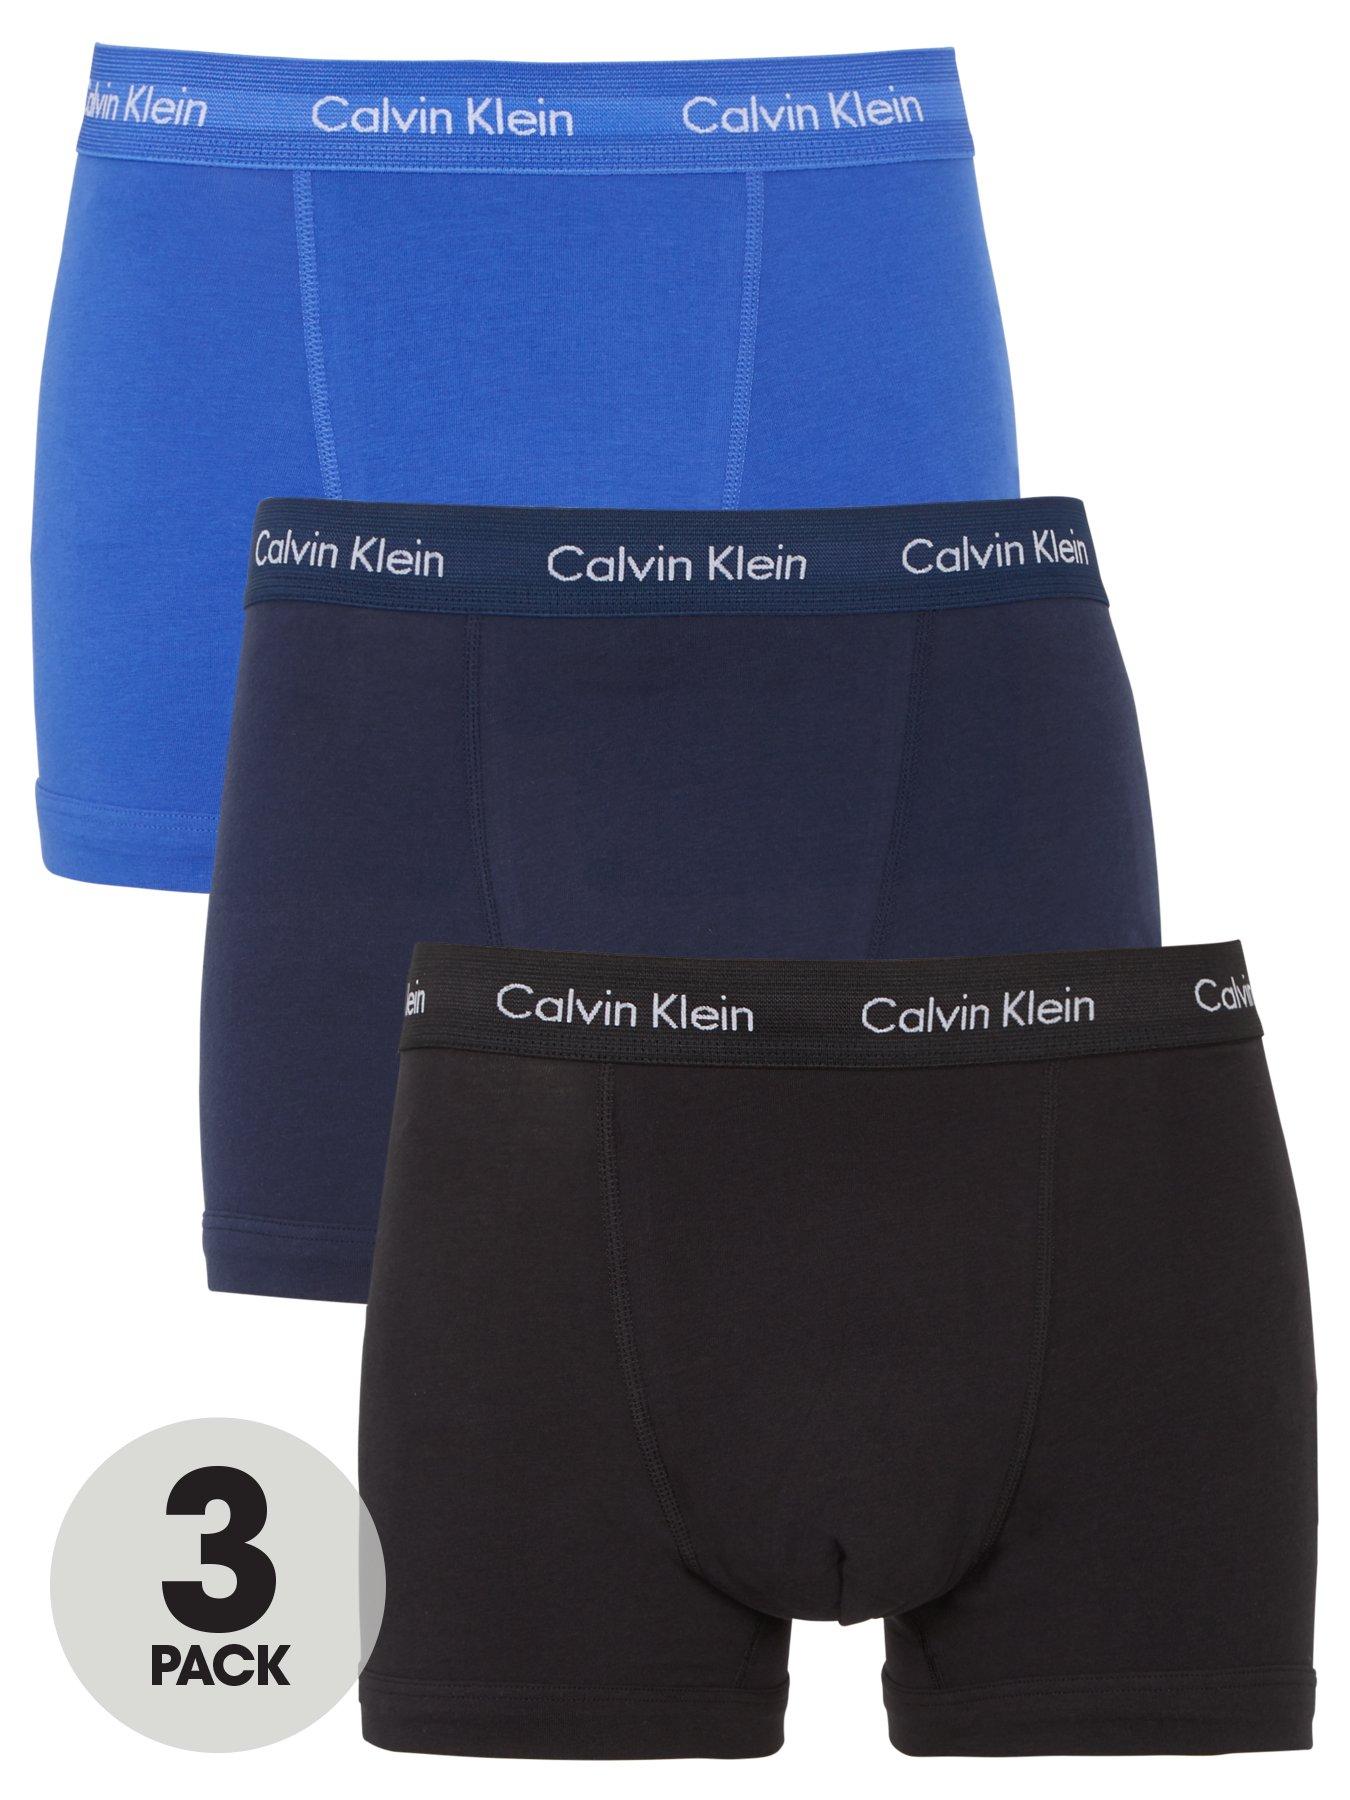 Buy Core Mixed Colour Hipster Boxers 10 Pack from Next USA